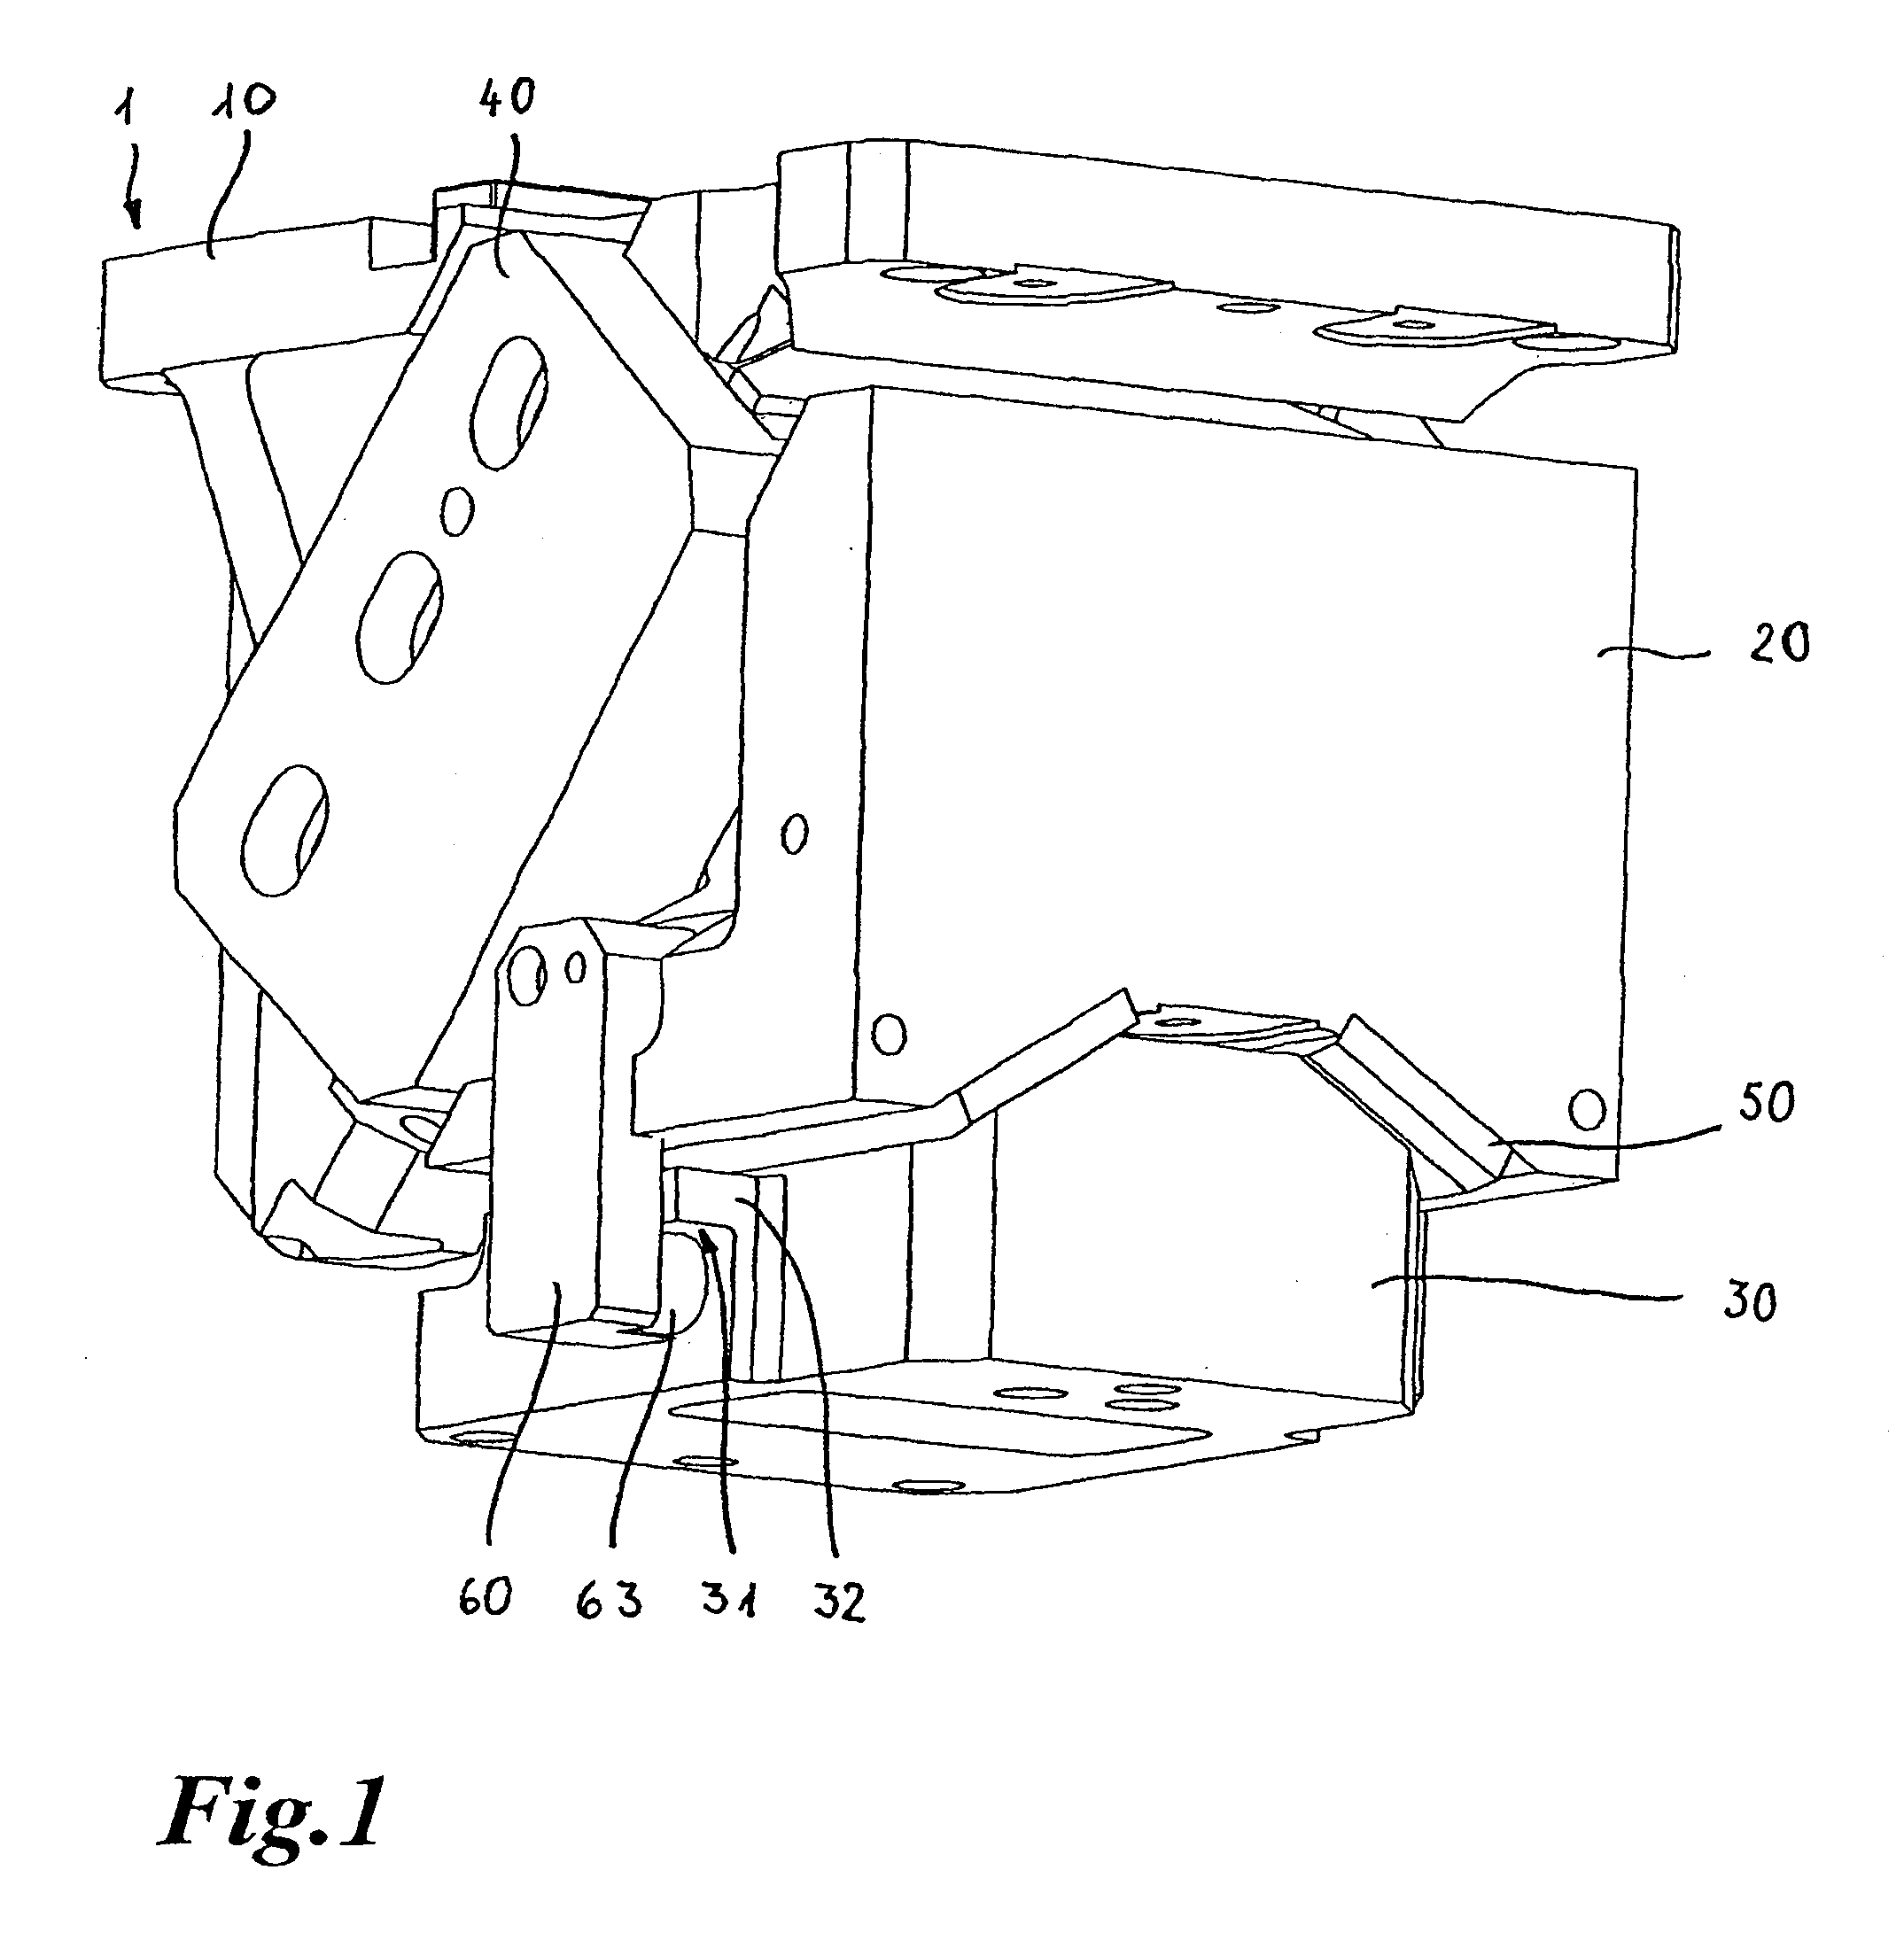 Wedge drive with a force returning device